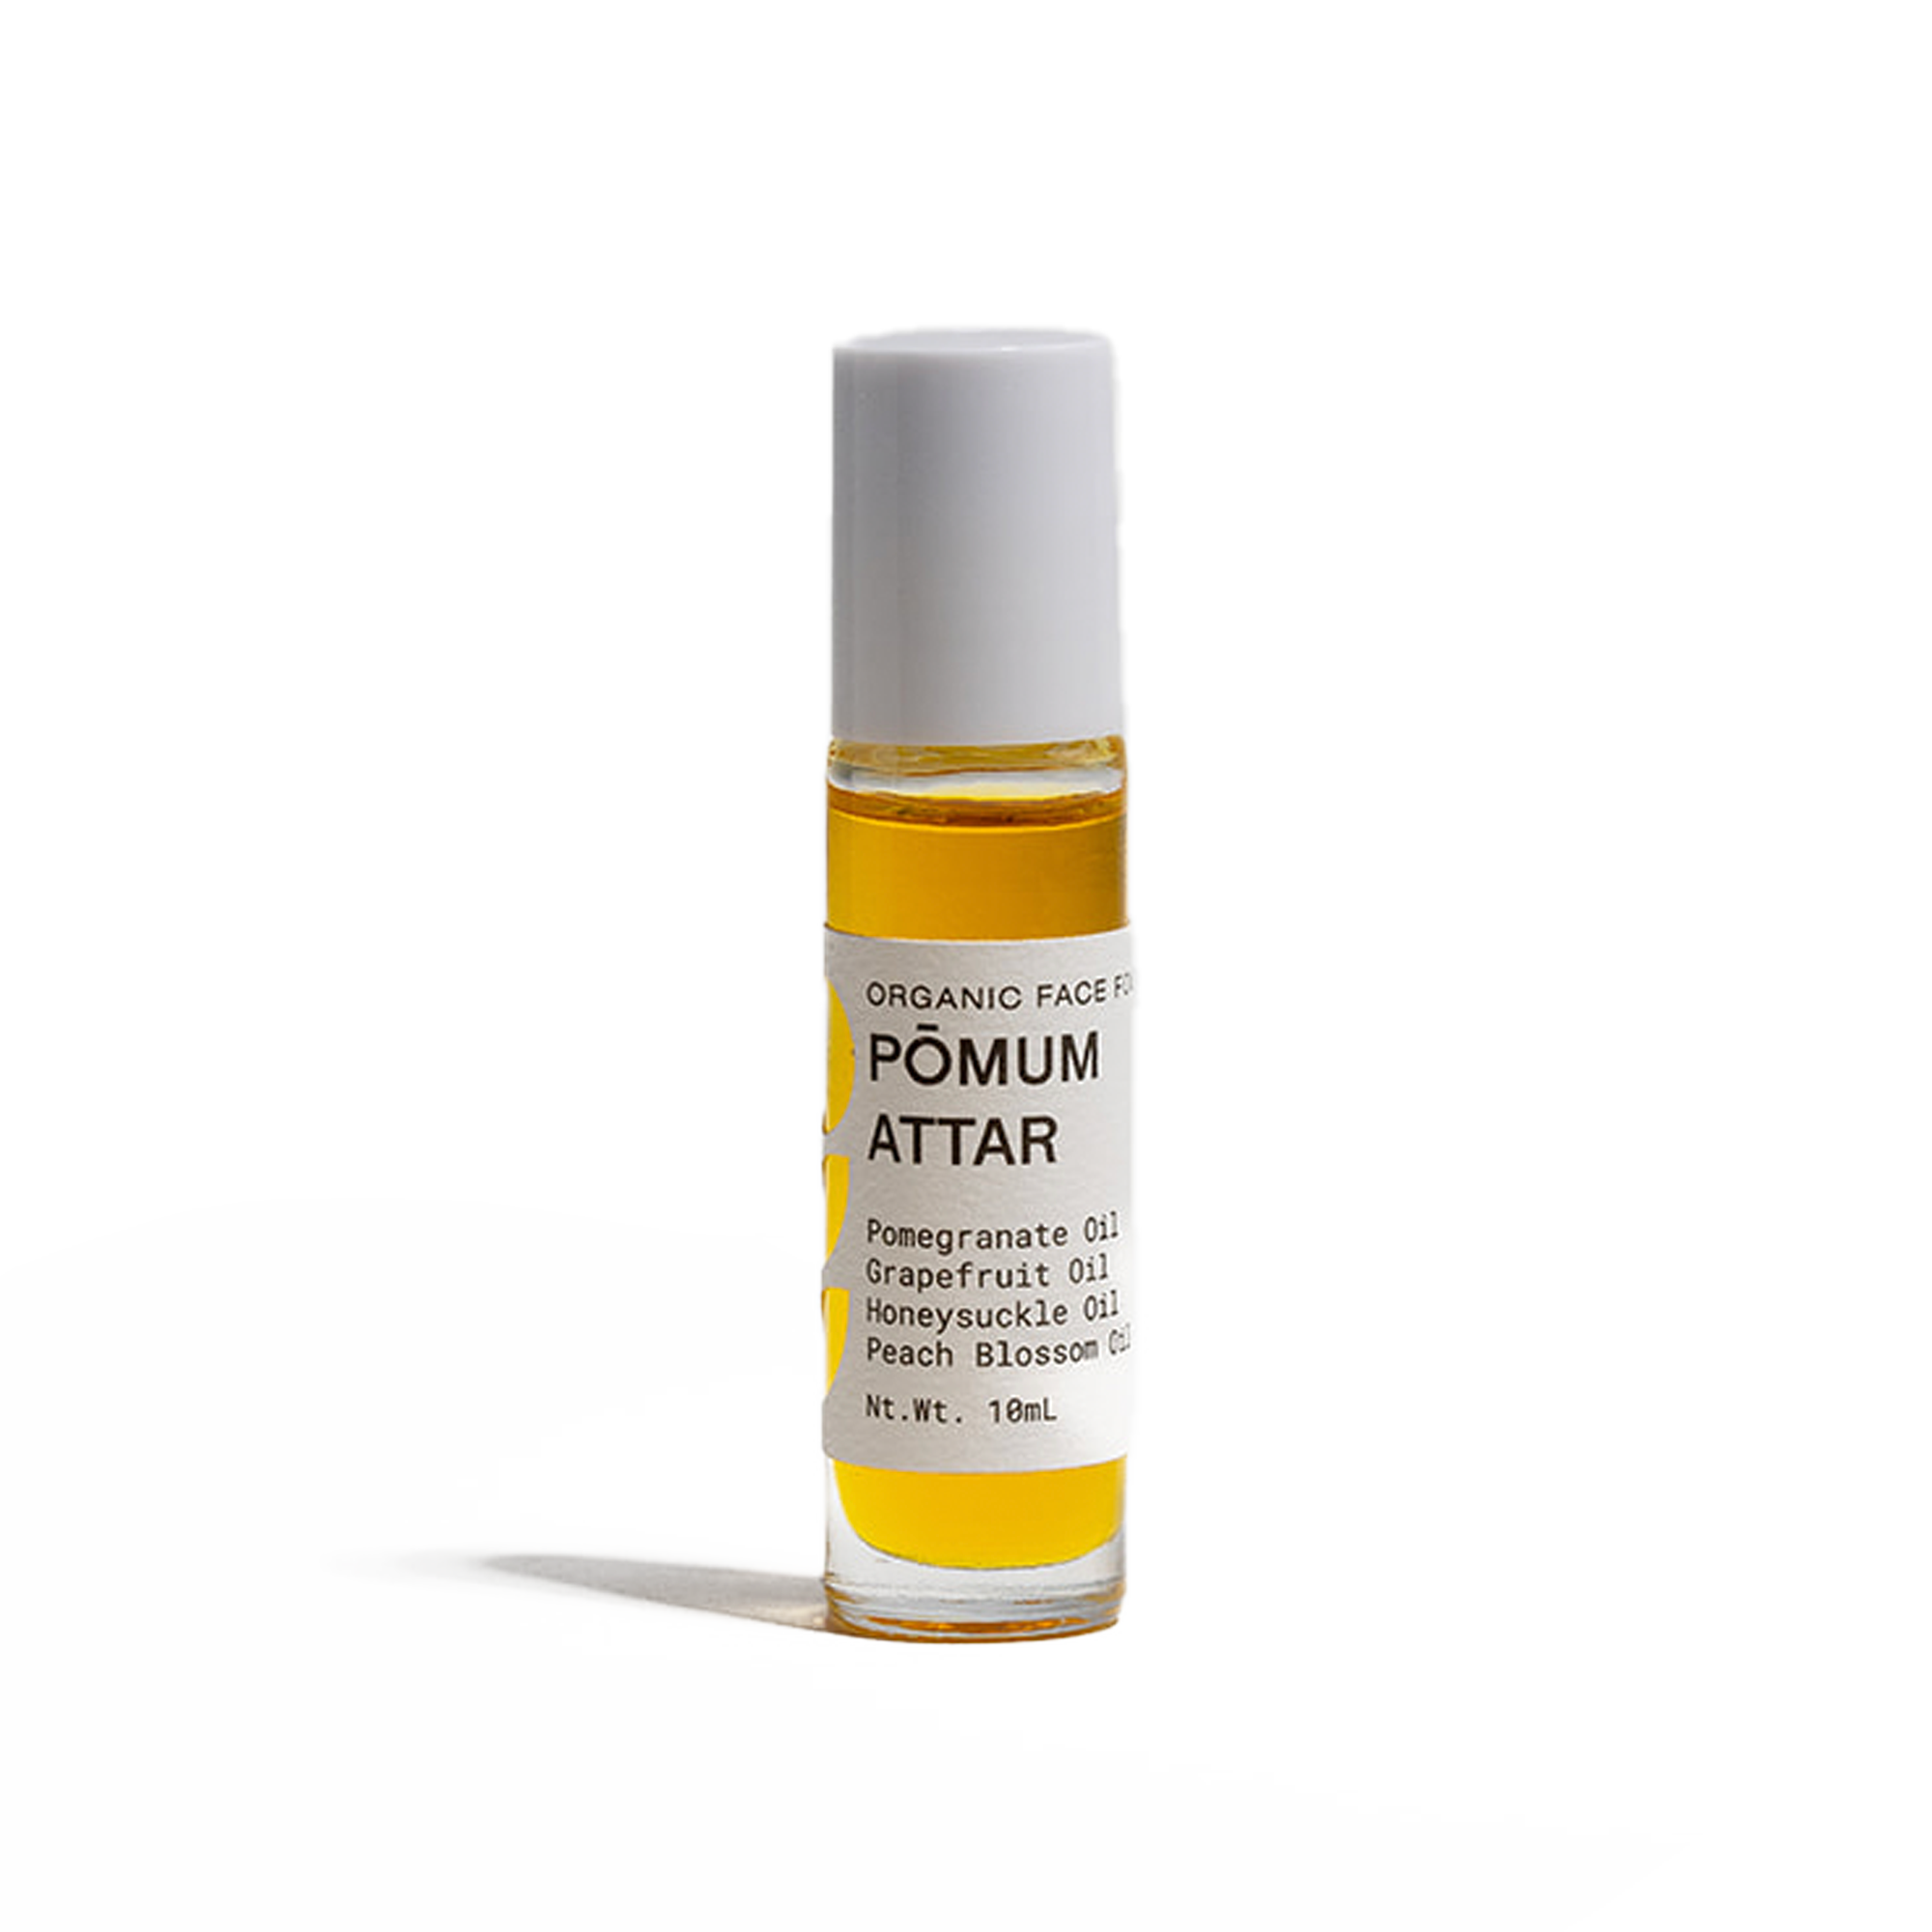 Title: "Pomum Attar - Natural Botanical Fragrance Description"  Description: This file provides information about Pomum Attar, a botanical fragrance made from all-natural ingredients. It is alcohol and chemical-free, non-greasy, and has a long-lasting refreshing scent. The oil also moisturizes the skin, making it suitable for all skin types.